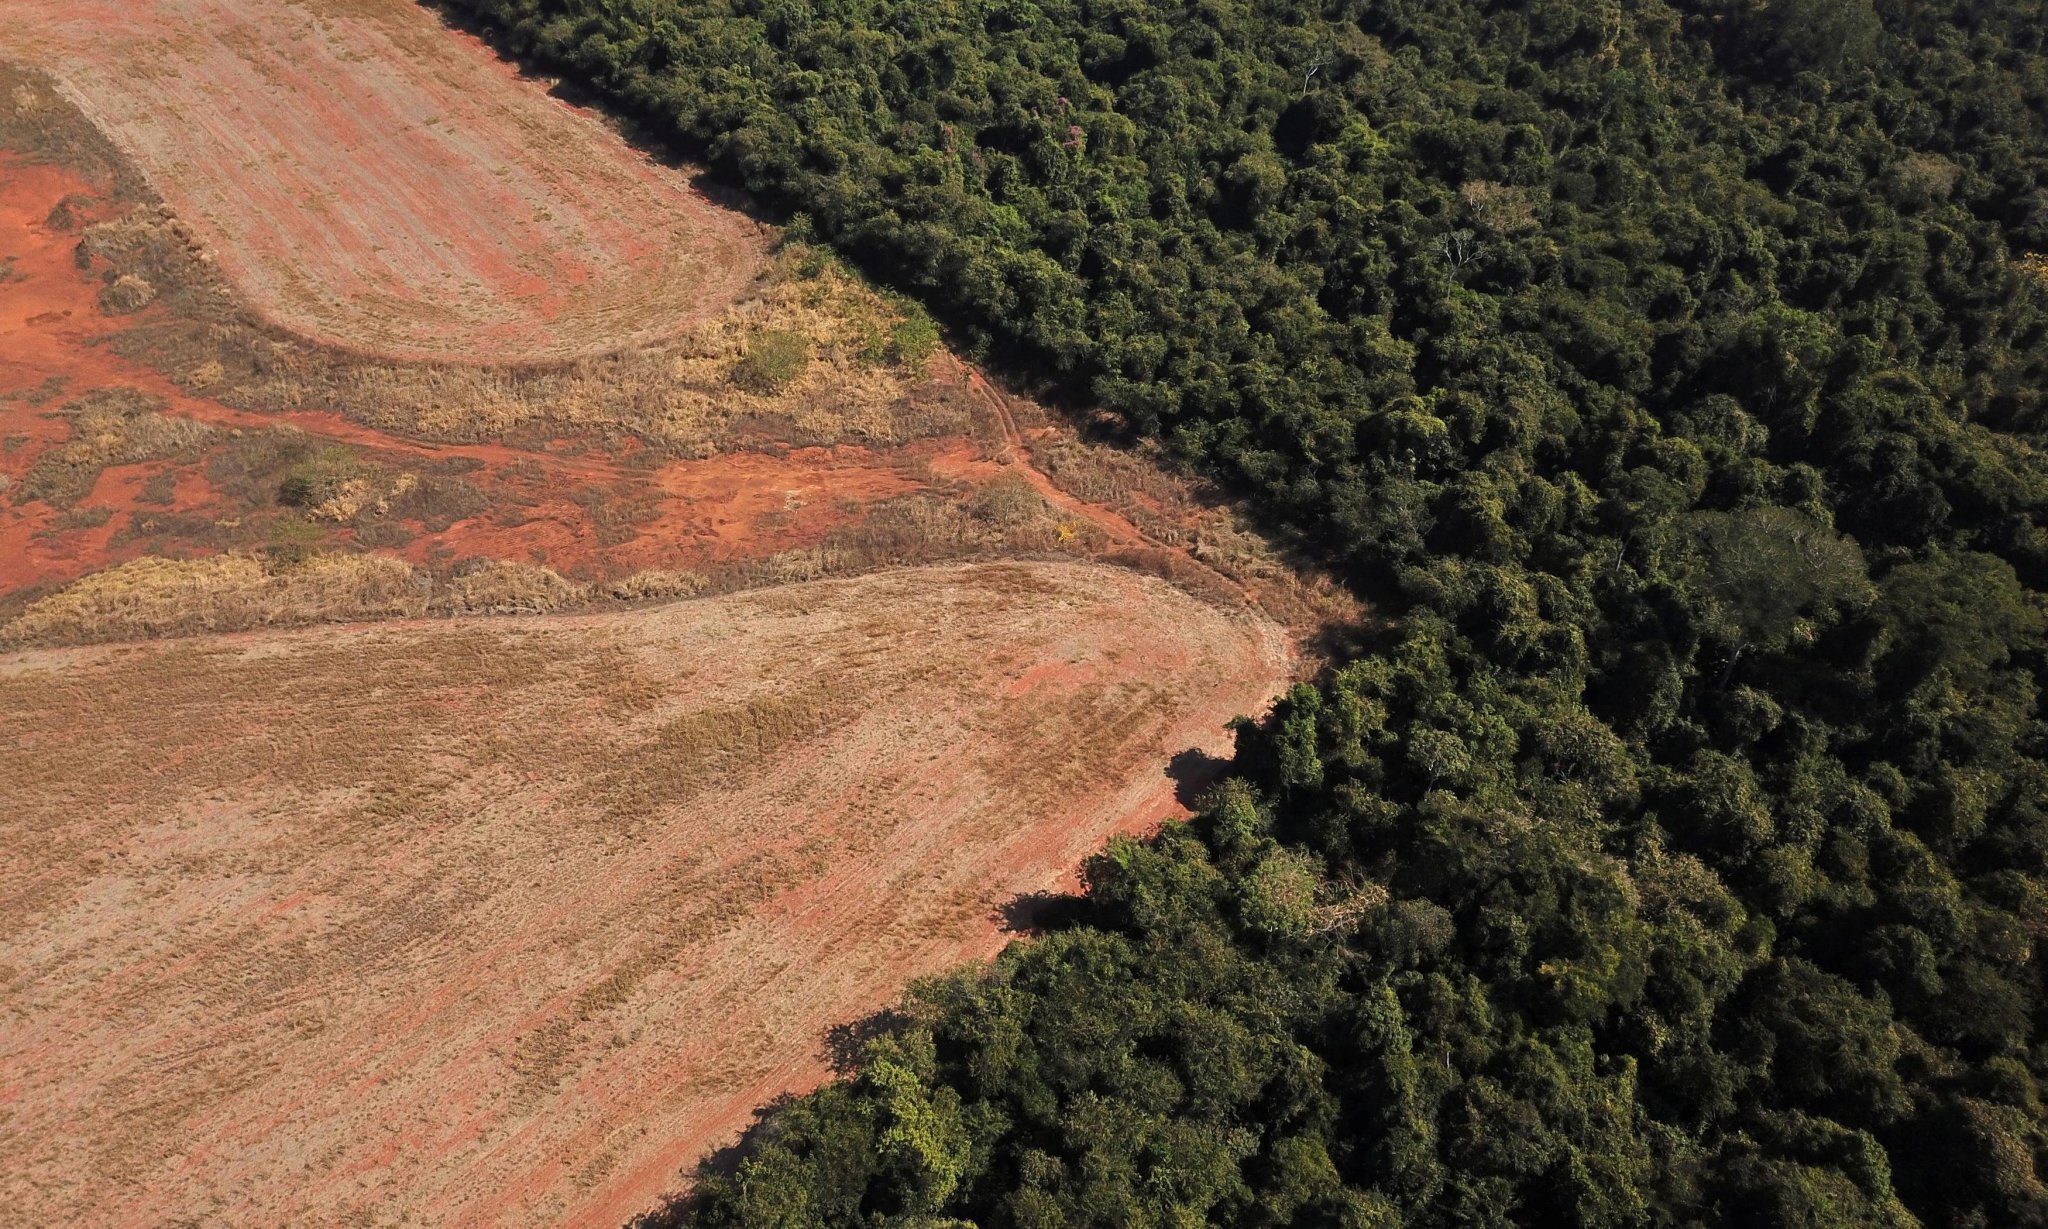 Biden, Bolsonaro and Xi among leaders agreeing to end deforestation